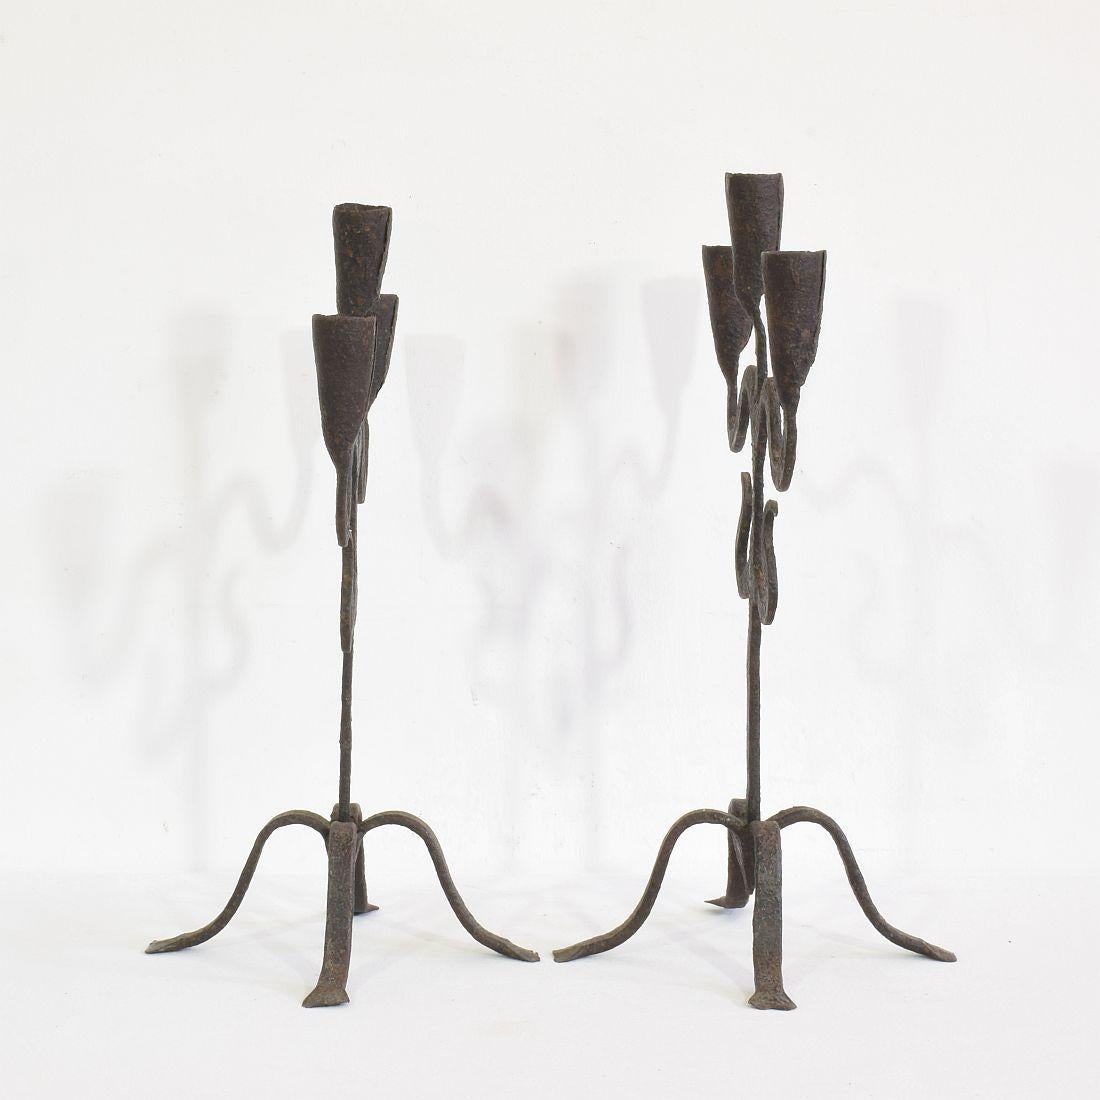 Rustic Pair of 18th-19th Century Hand-Forged Iron Candleholders